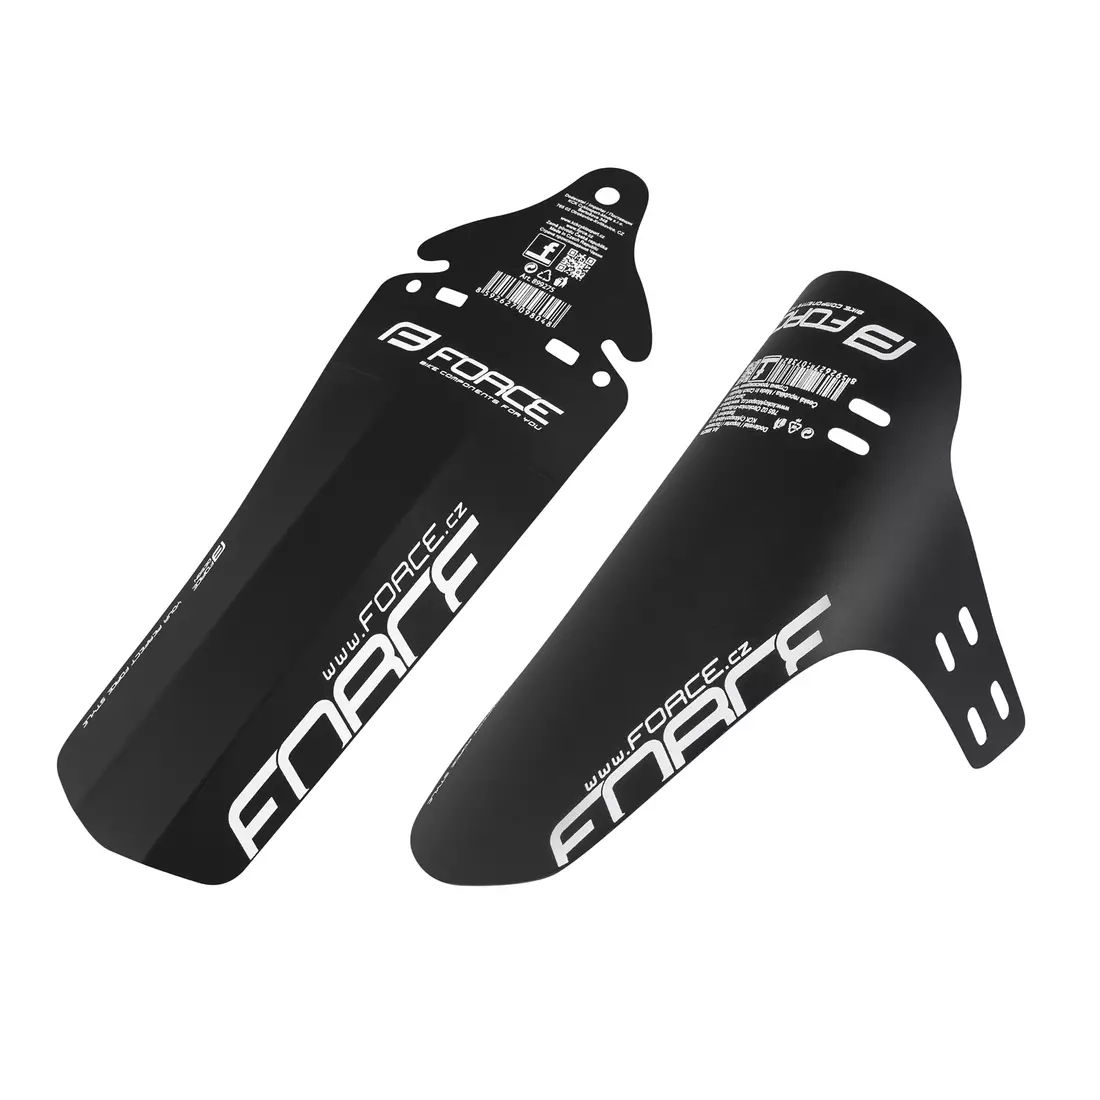 FORCE set of MTB mudguards front + rear 899277